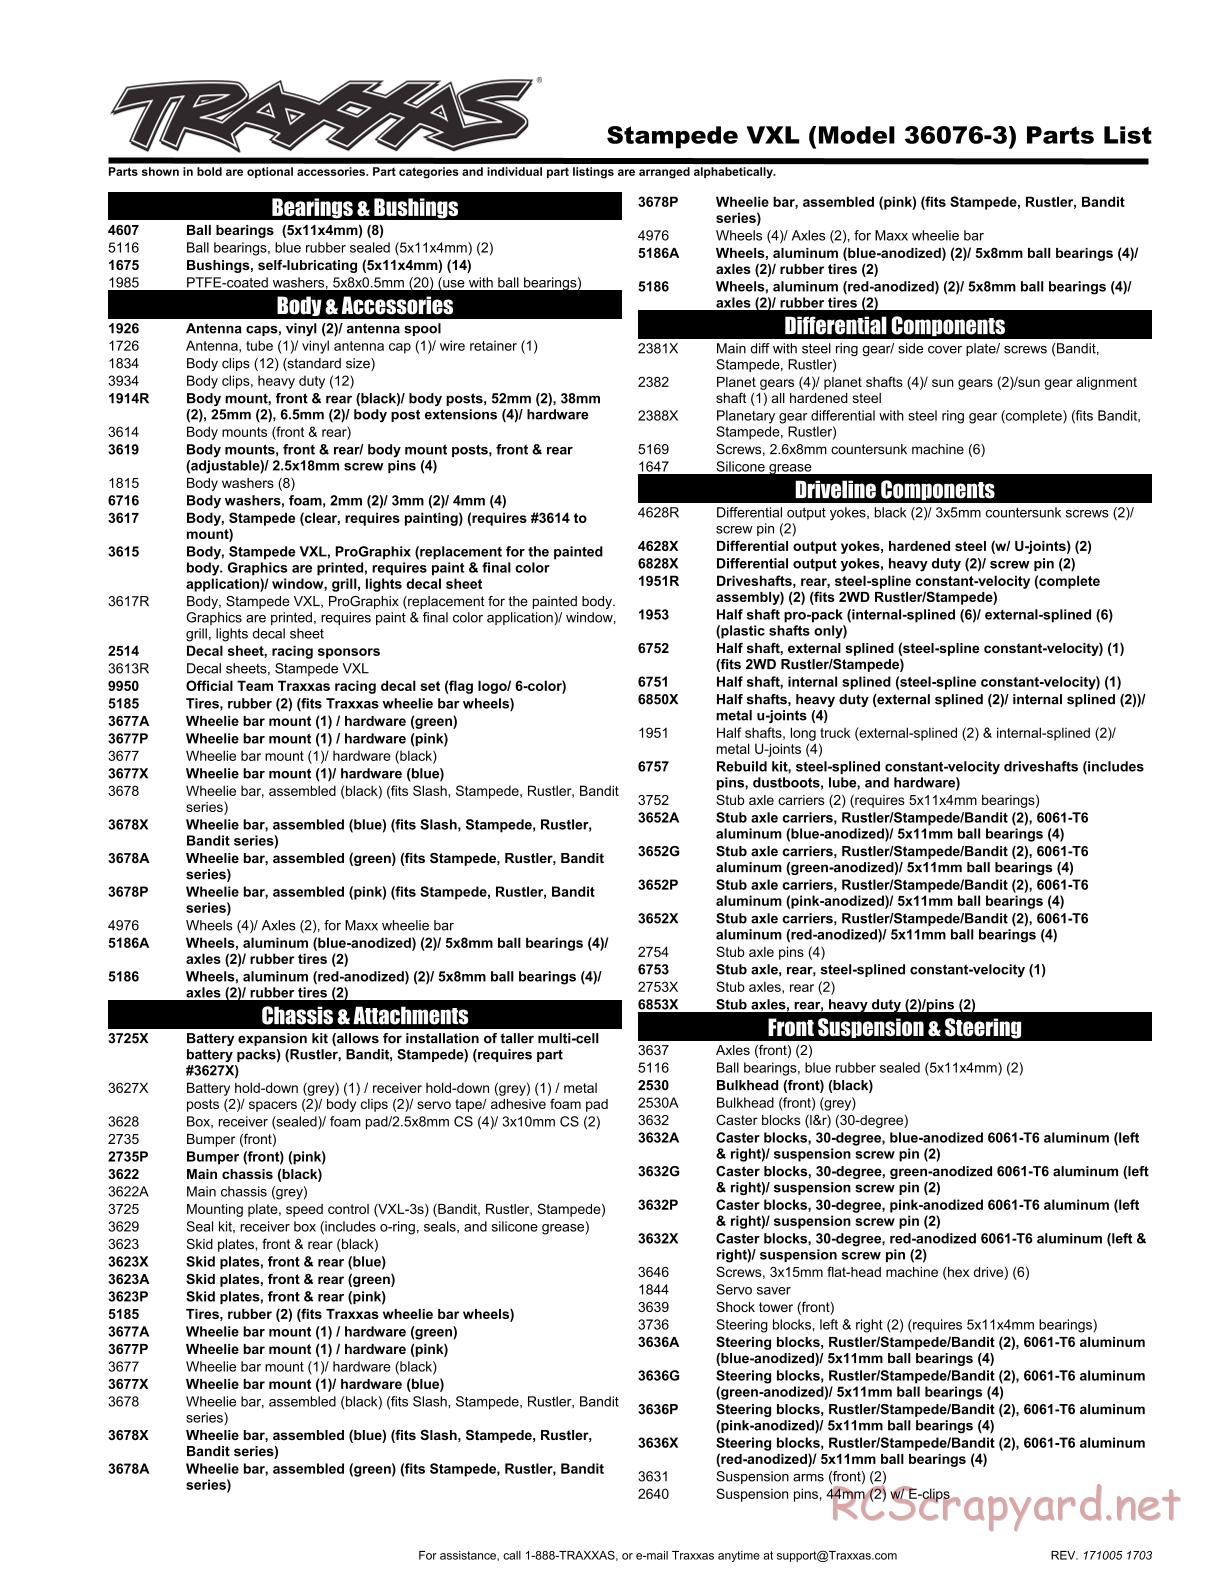 Traxxas - Stampede VXL - Parts List - Page 1